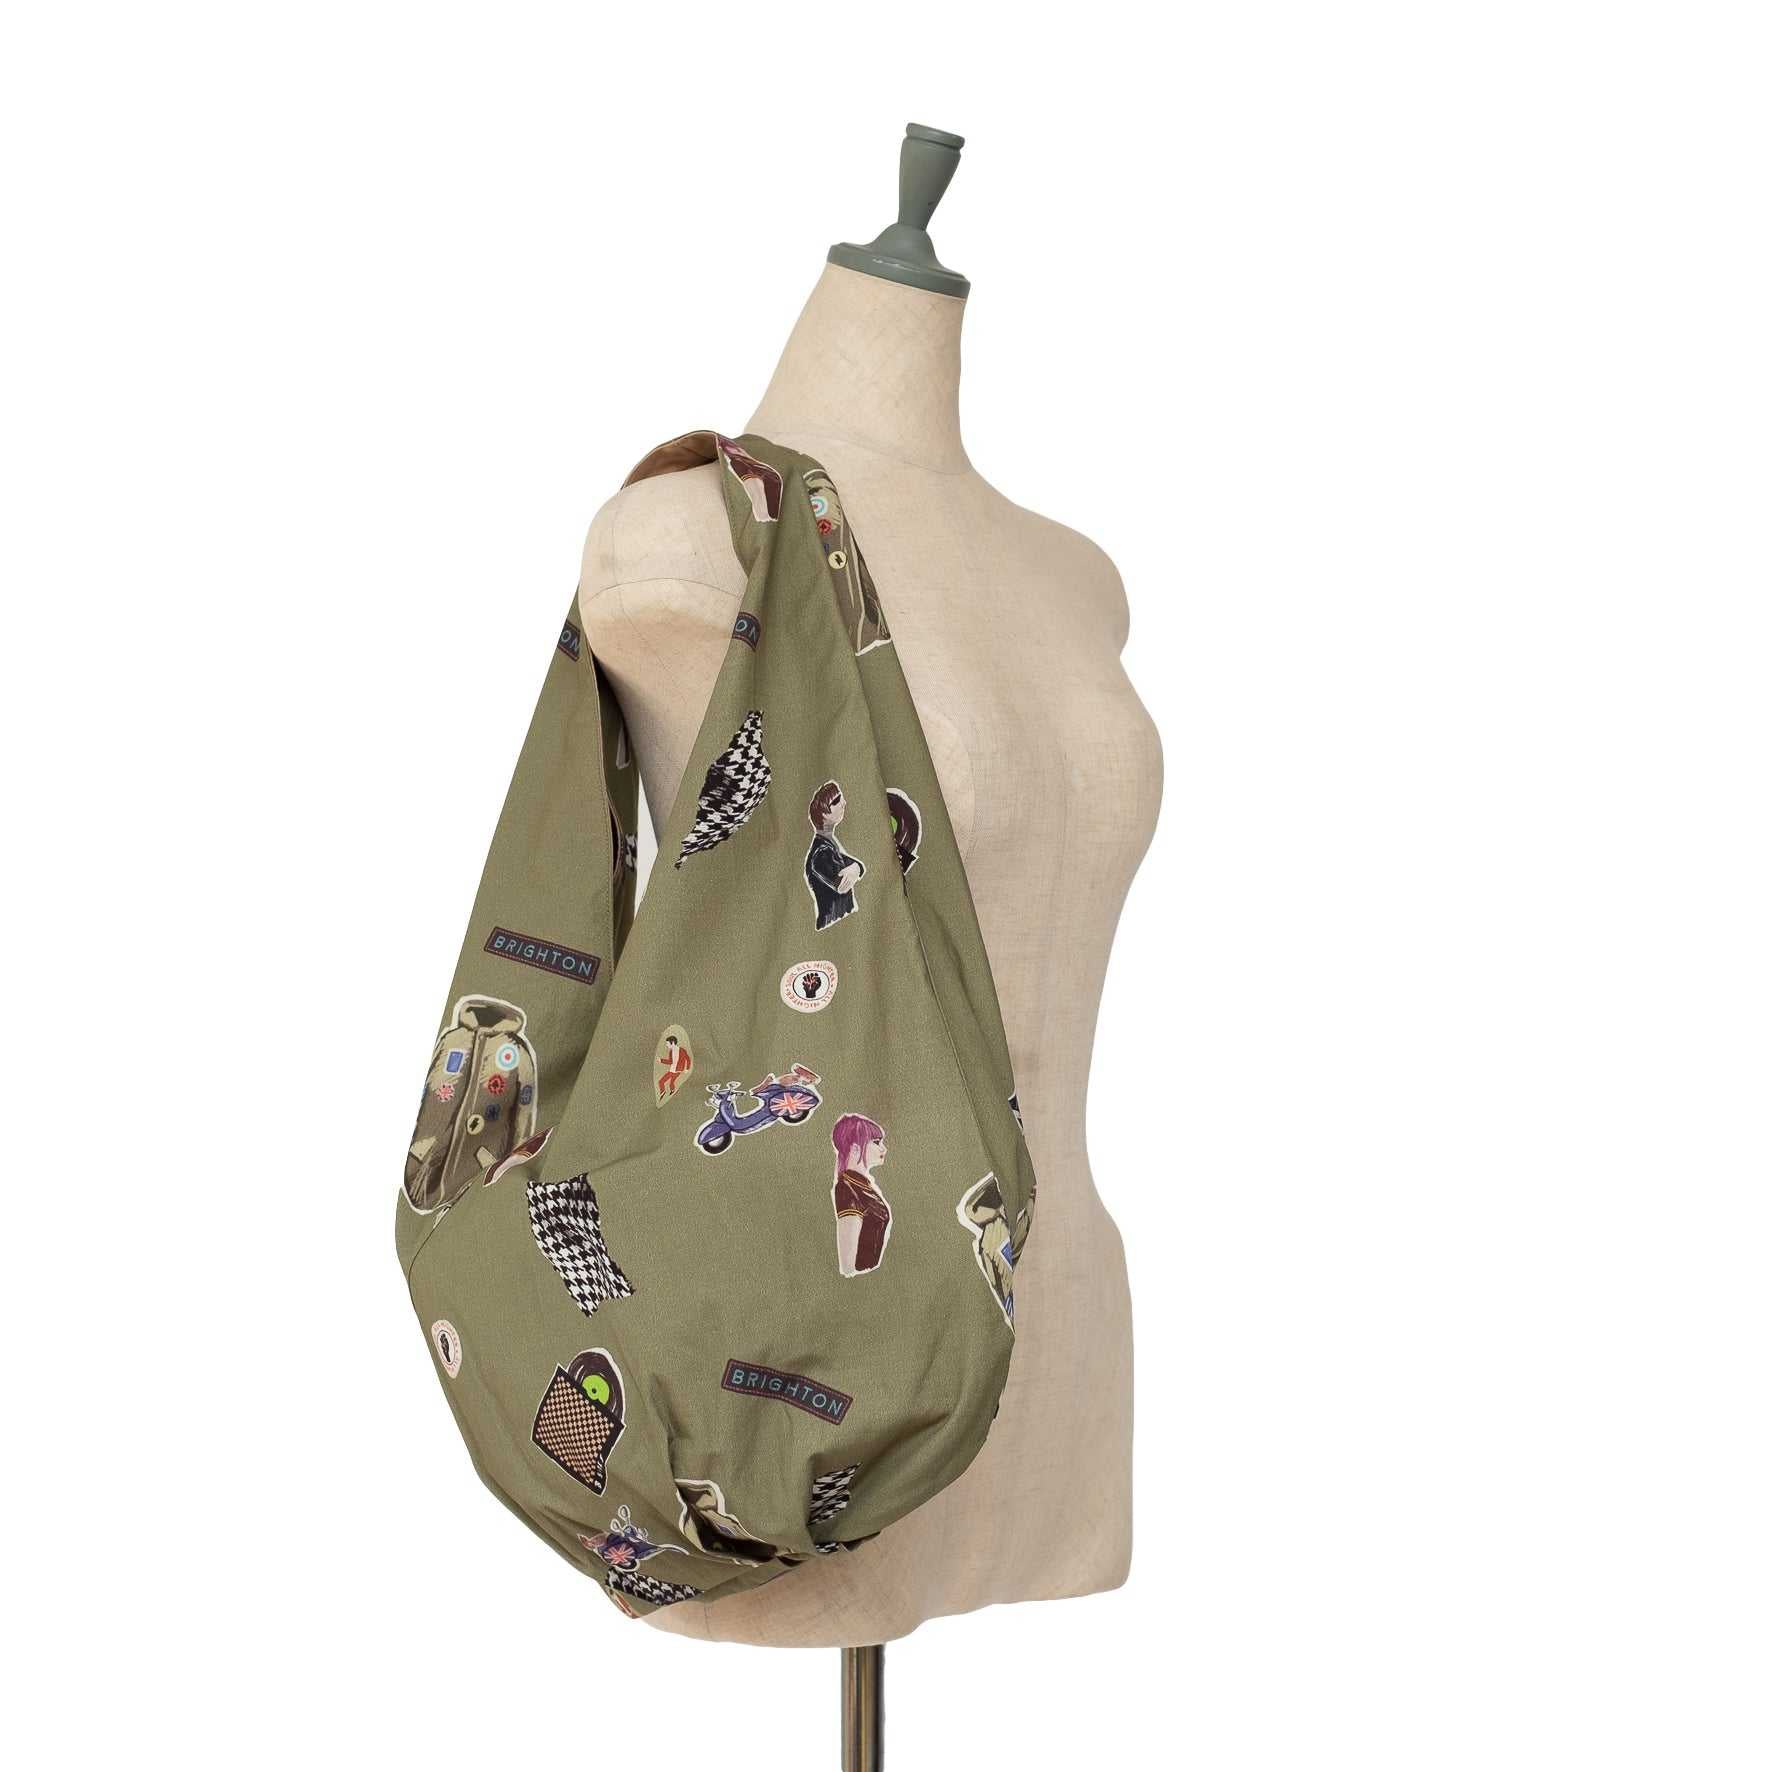 In Japan Organic Cotton Sling Bag 'The MODS' military green